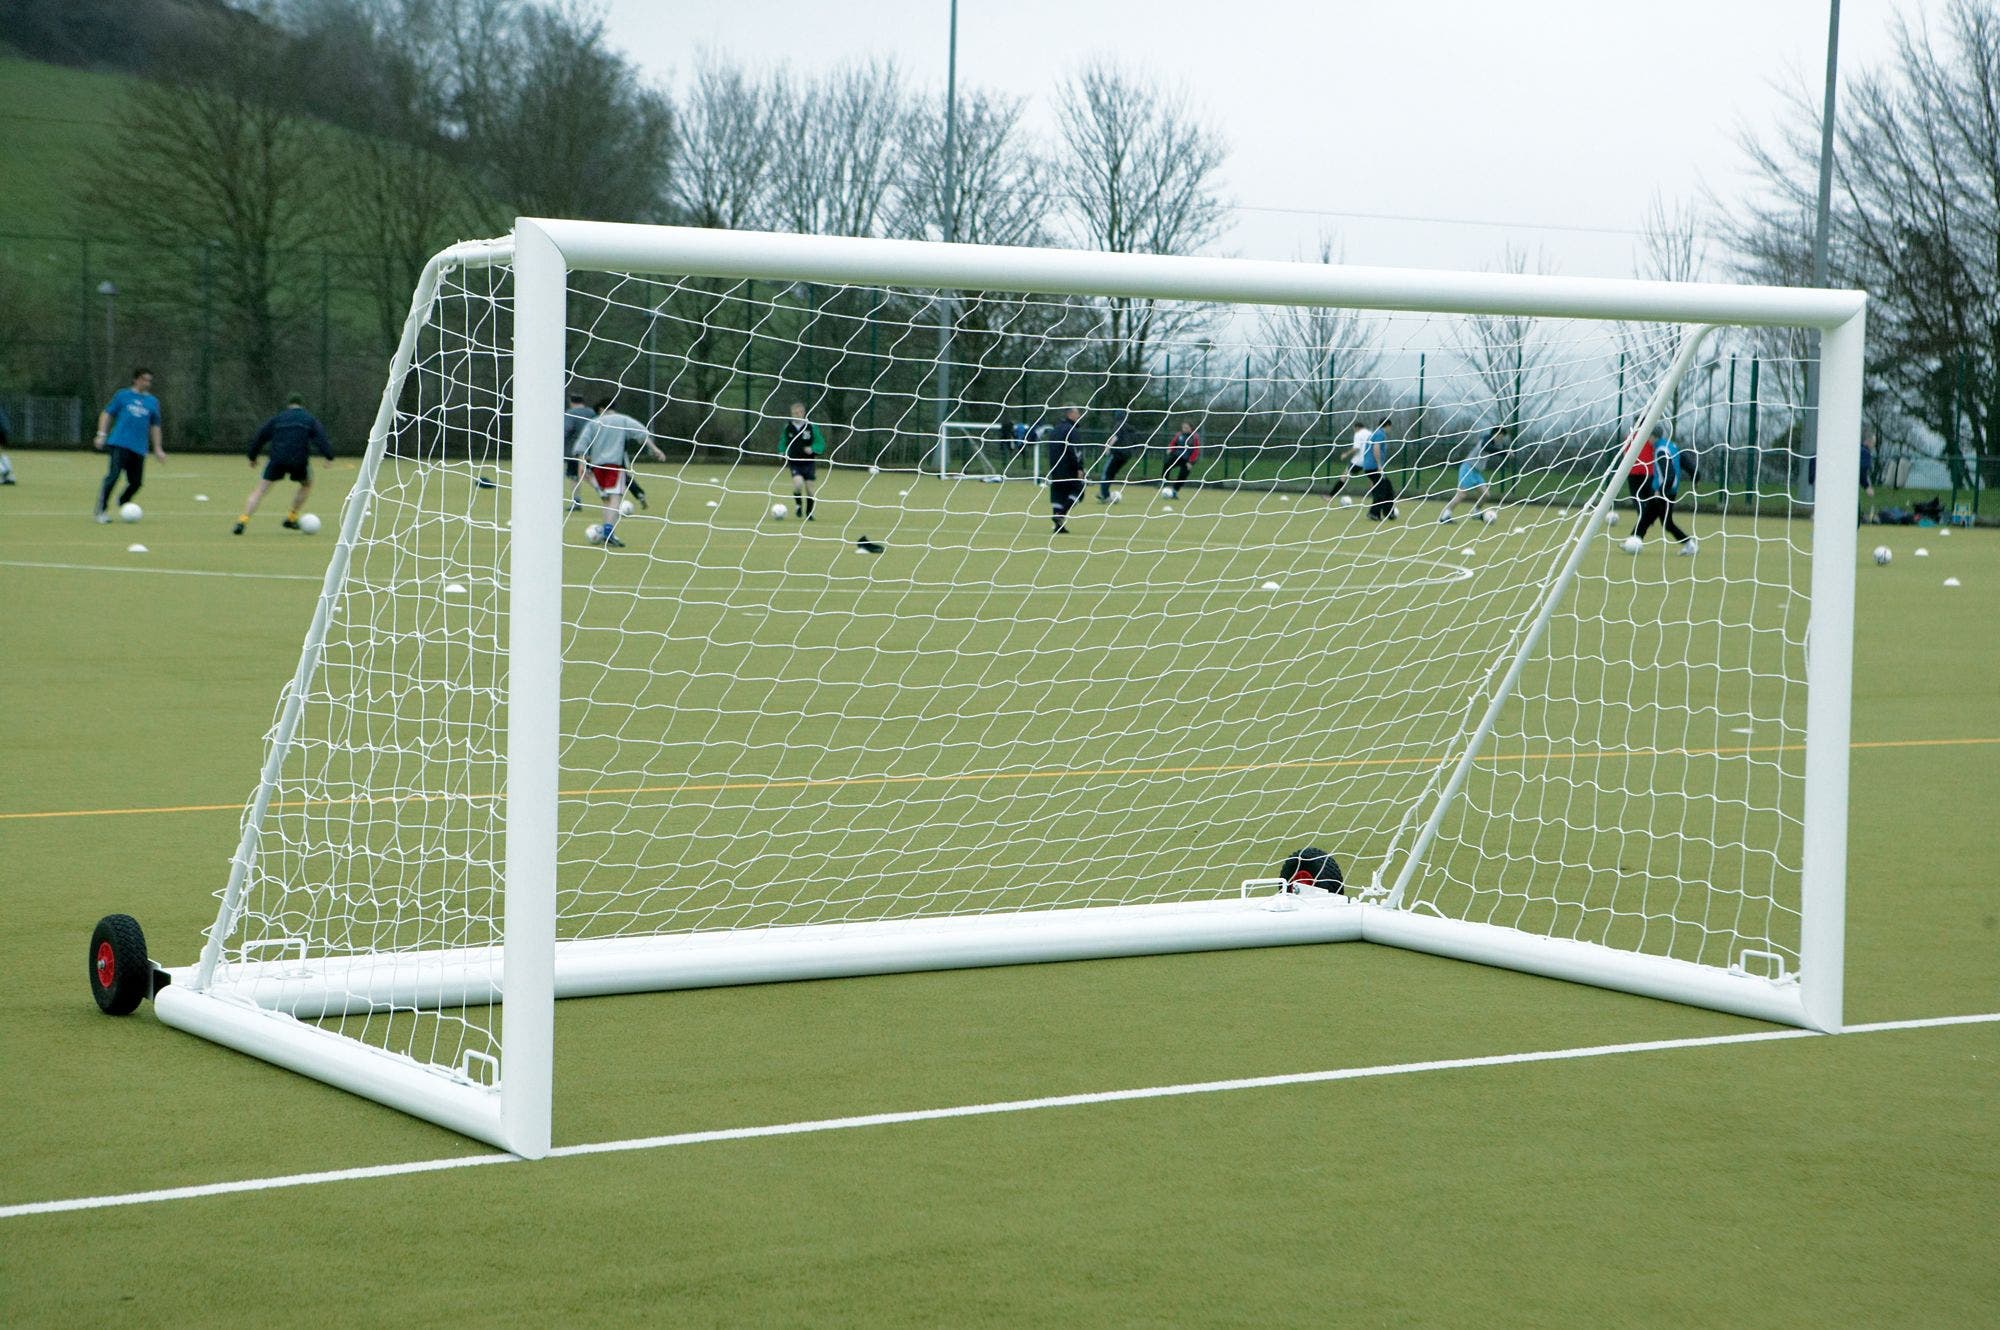 Values and Goals - Soccer Goal Post